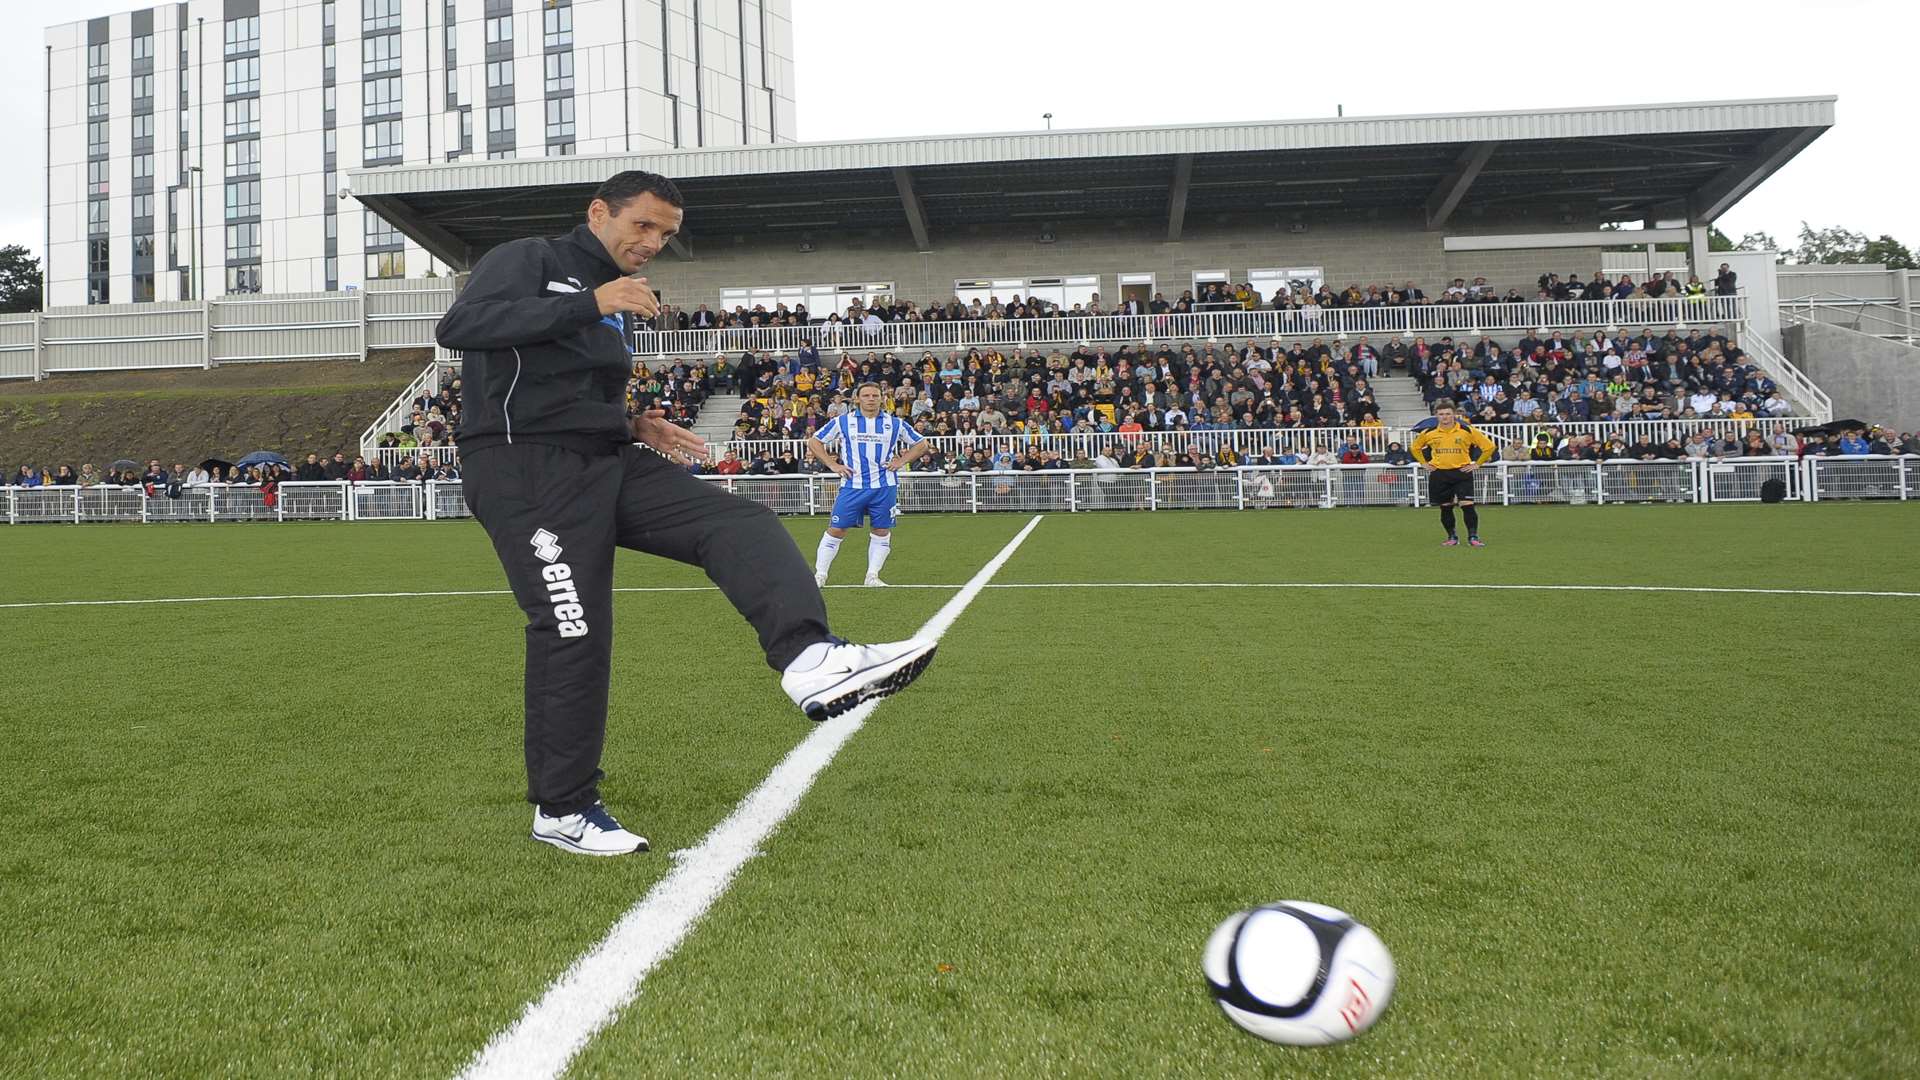 Brighton manager Gus Poyet opens the Gallagher Stadium five years ago Picture: Ady Kerry